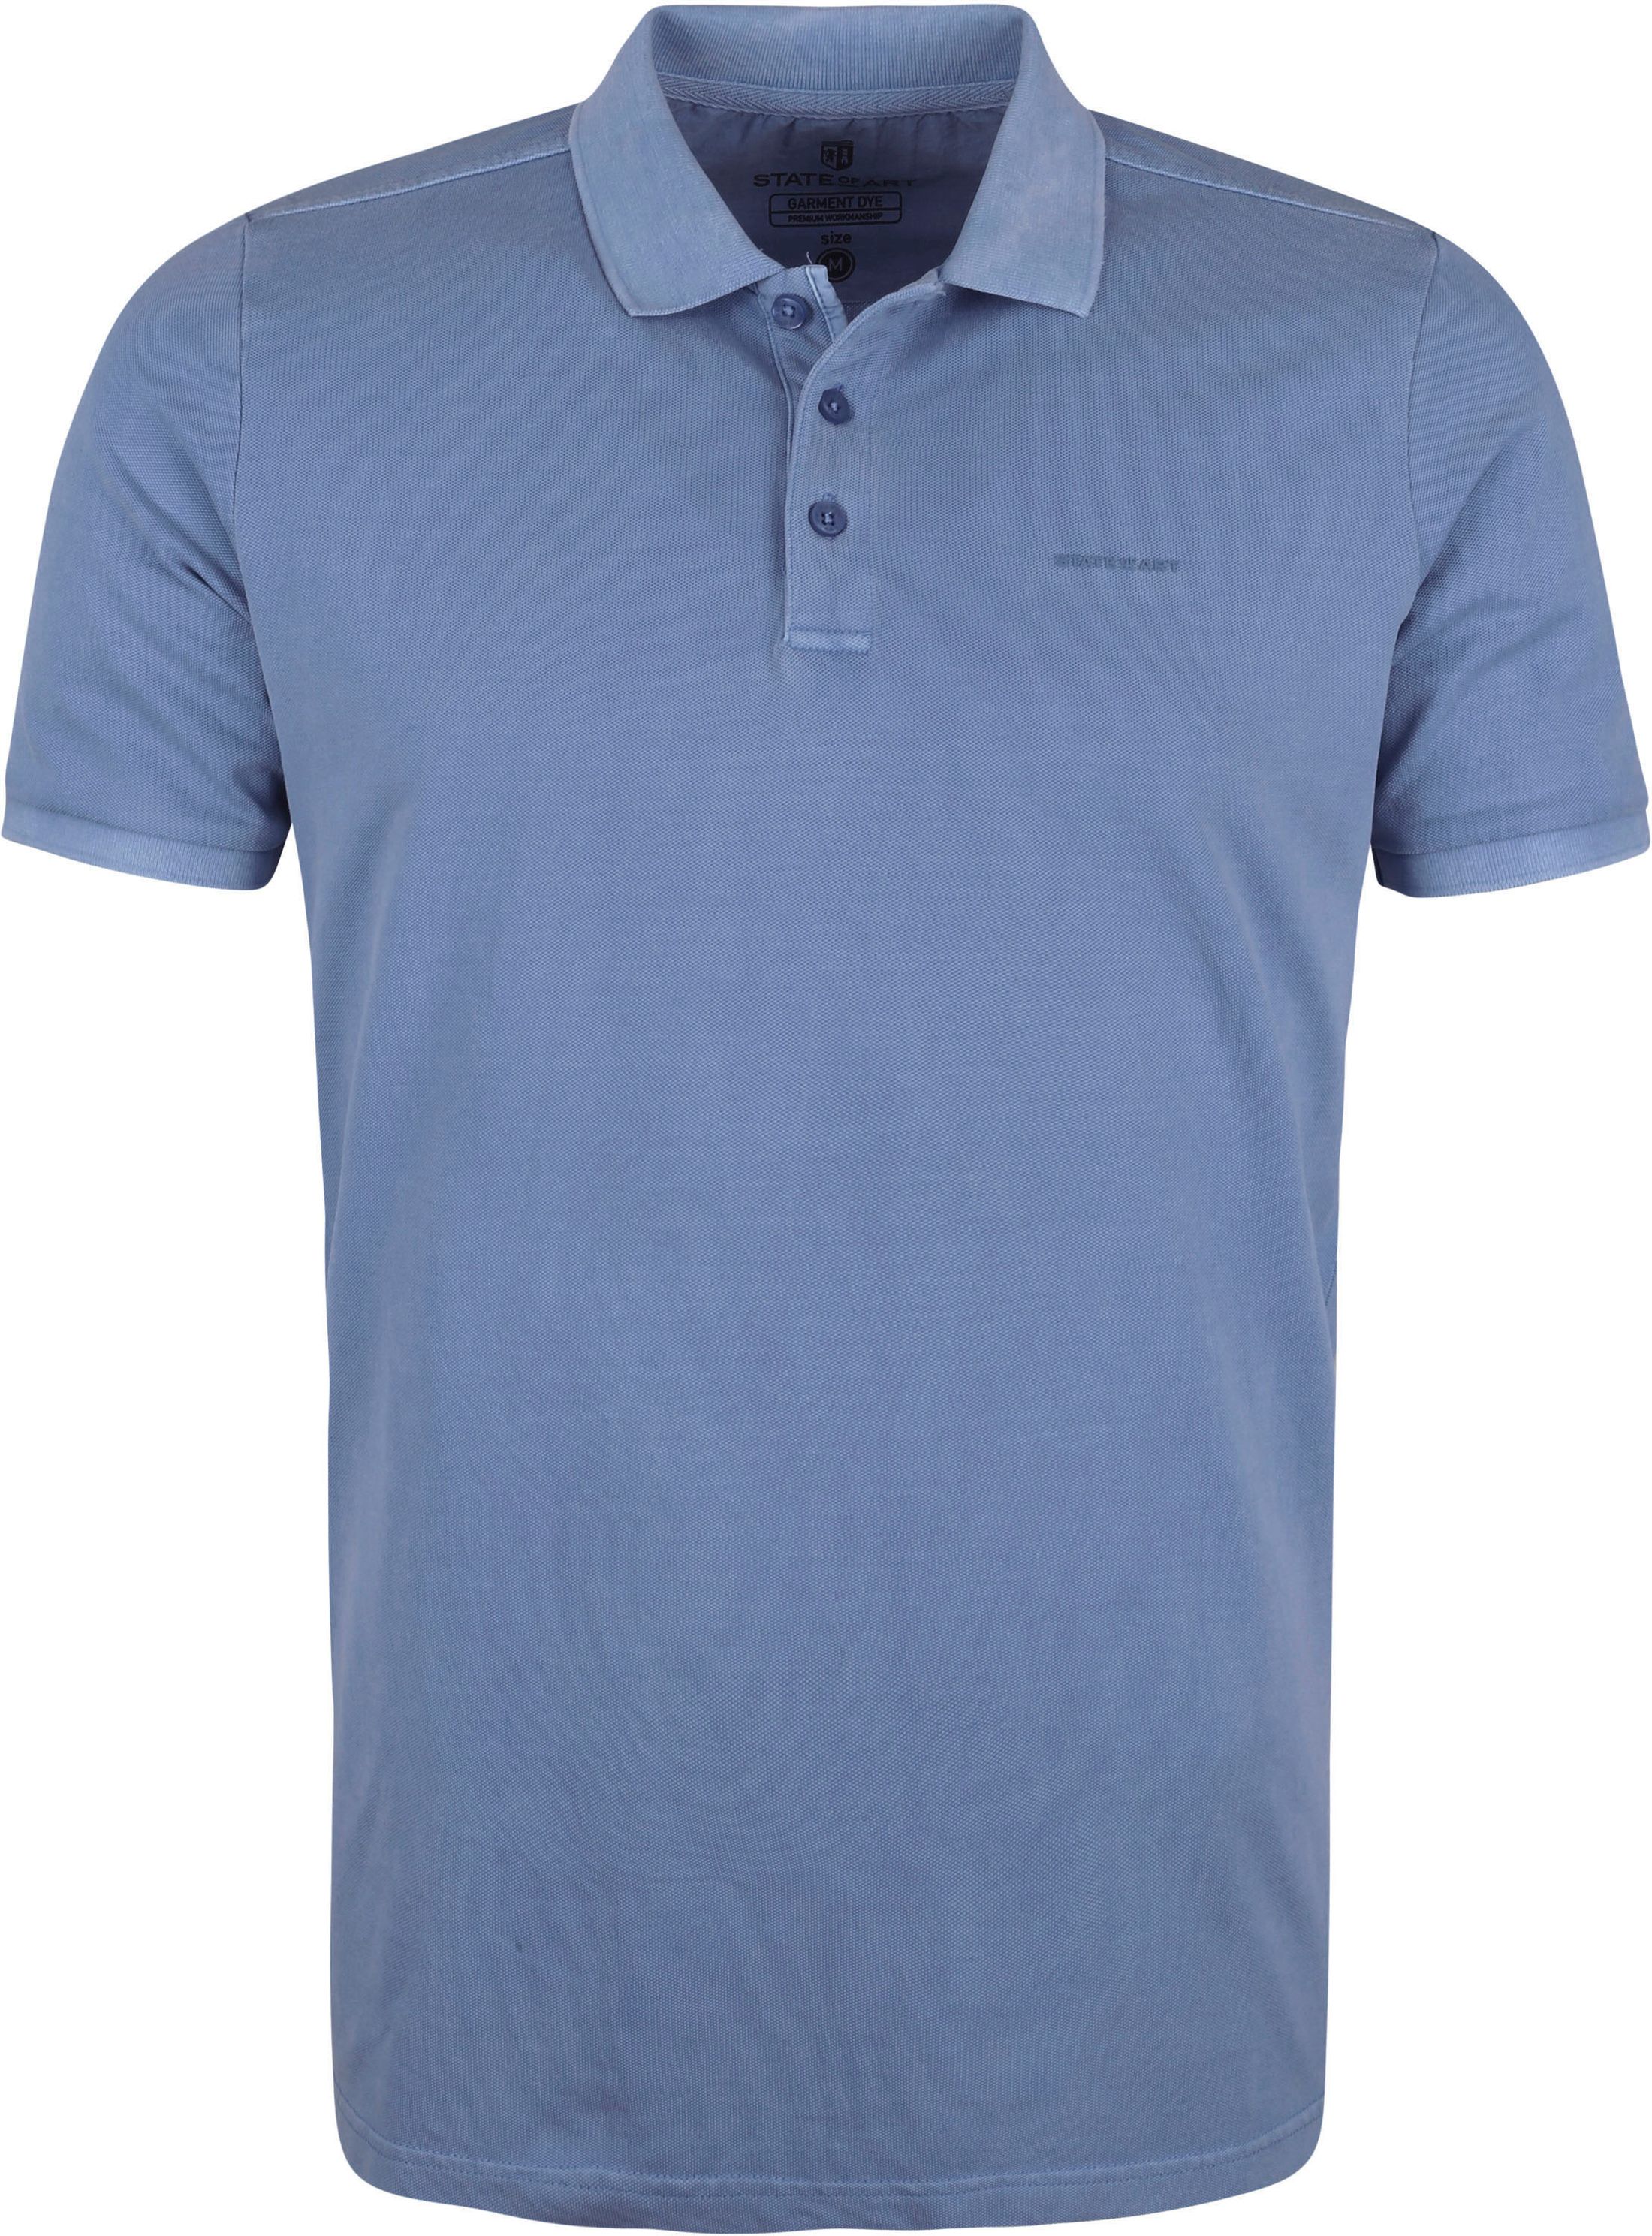 State Of Art Pique Polo Shirt Gray Blue Grey size L